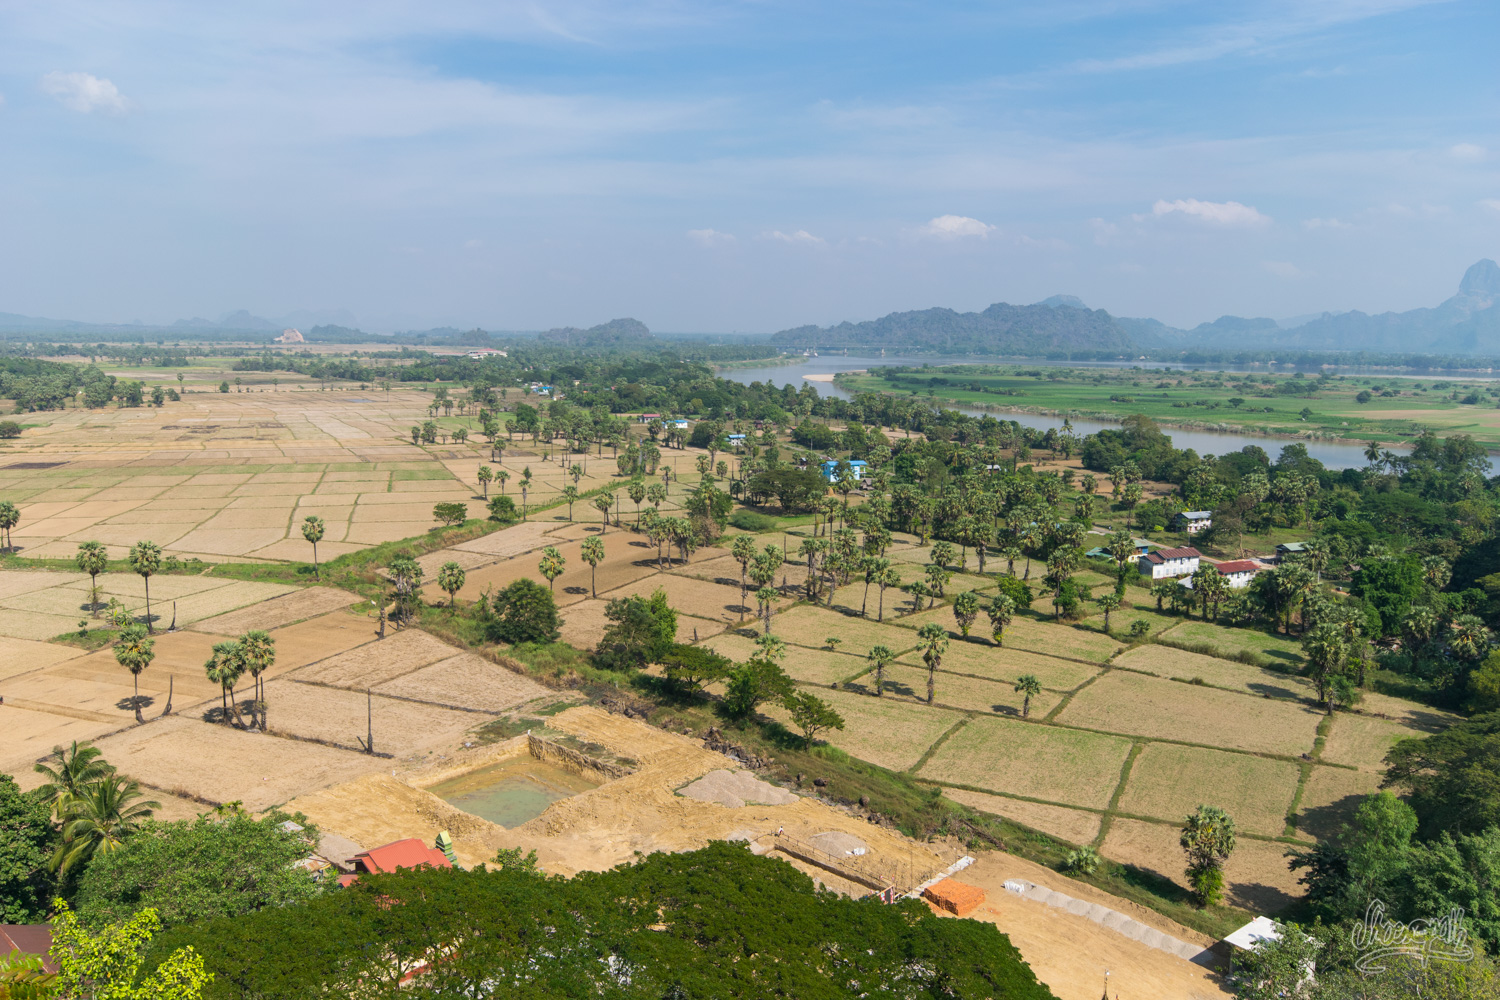 Panoramic view over Hpa An region, from the top of Kaw Goon Cave